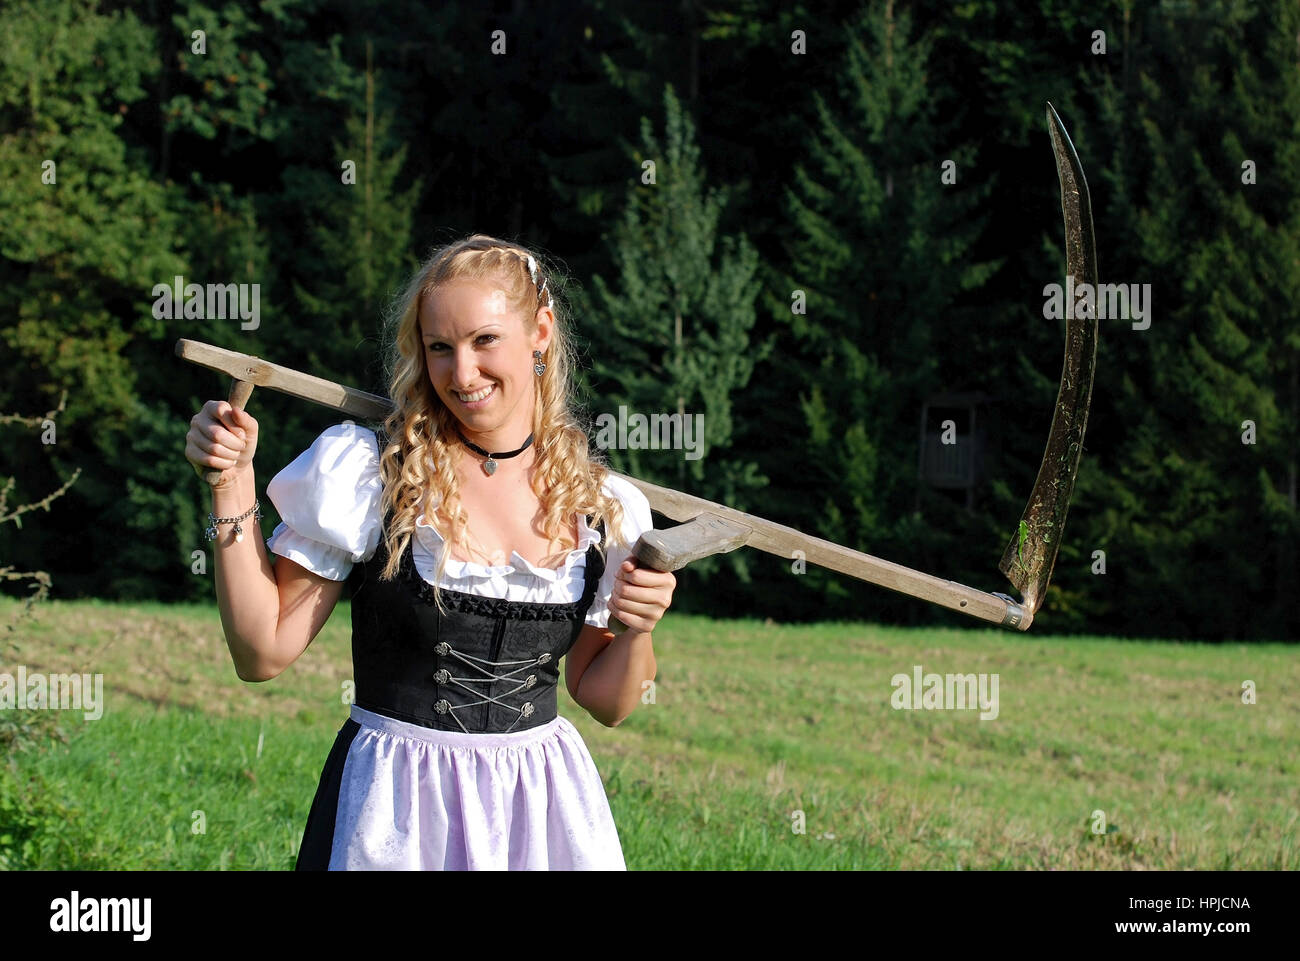 Model released , Junge Baeurin im Dirndl mit Sense - young woman in dirndl with scythe Stock Photo